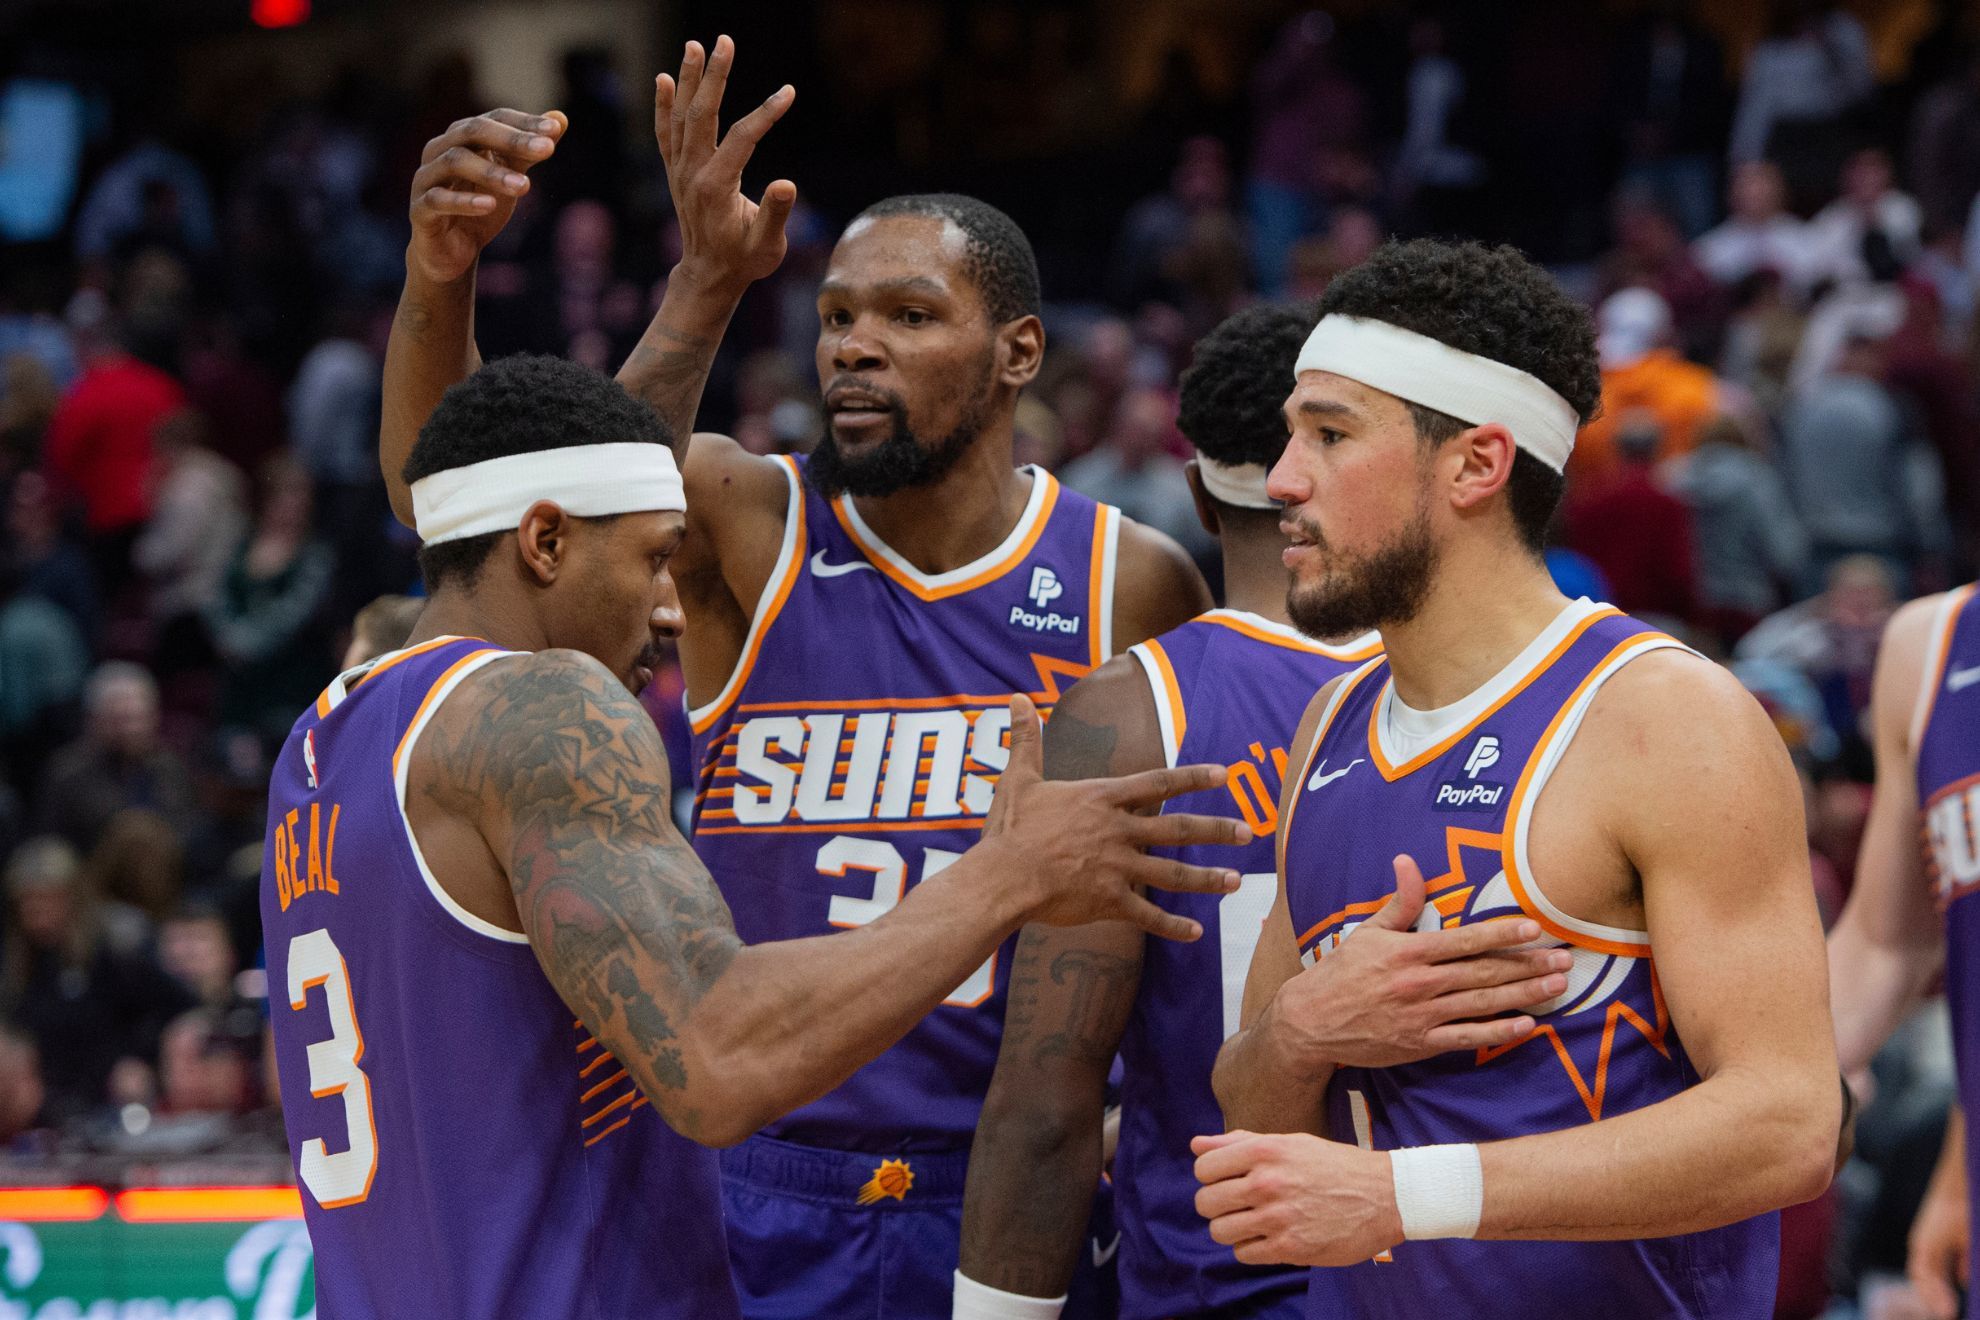 Suns star leads list of worst contracts in NBA, according to cap expert